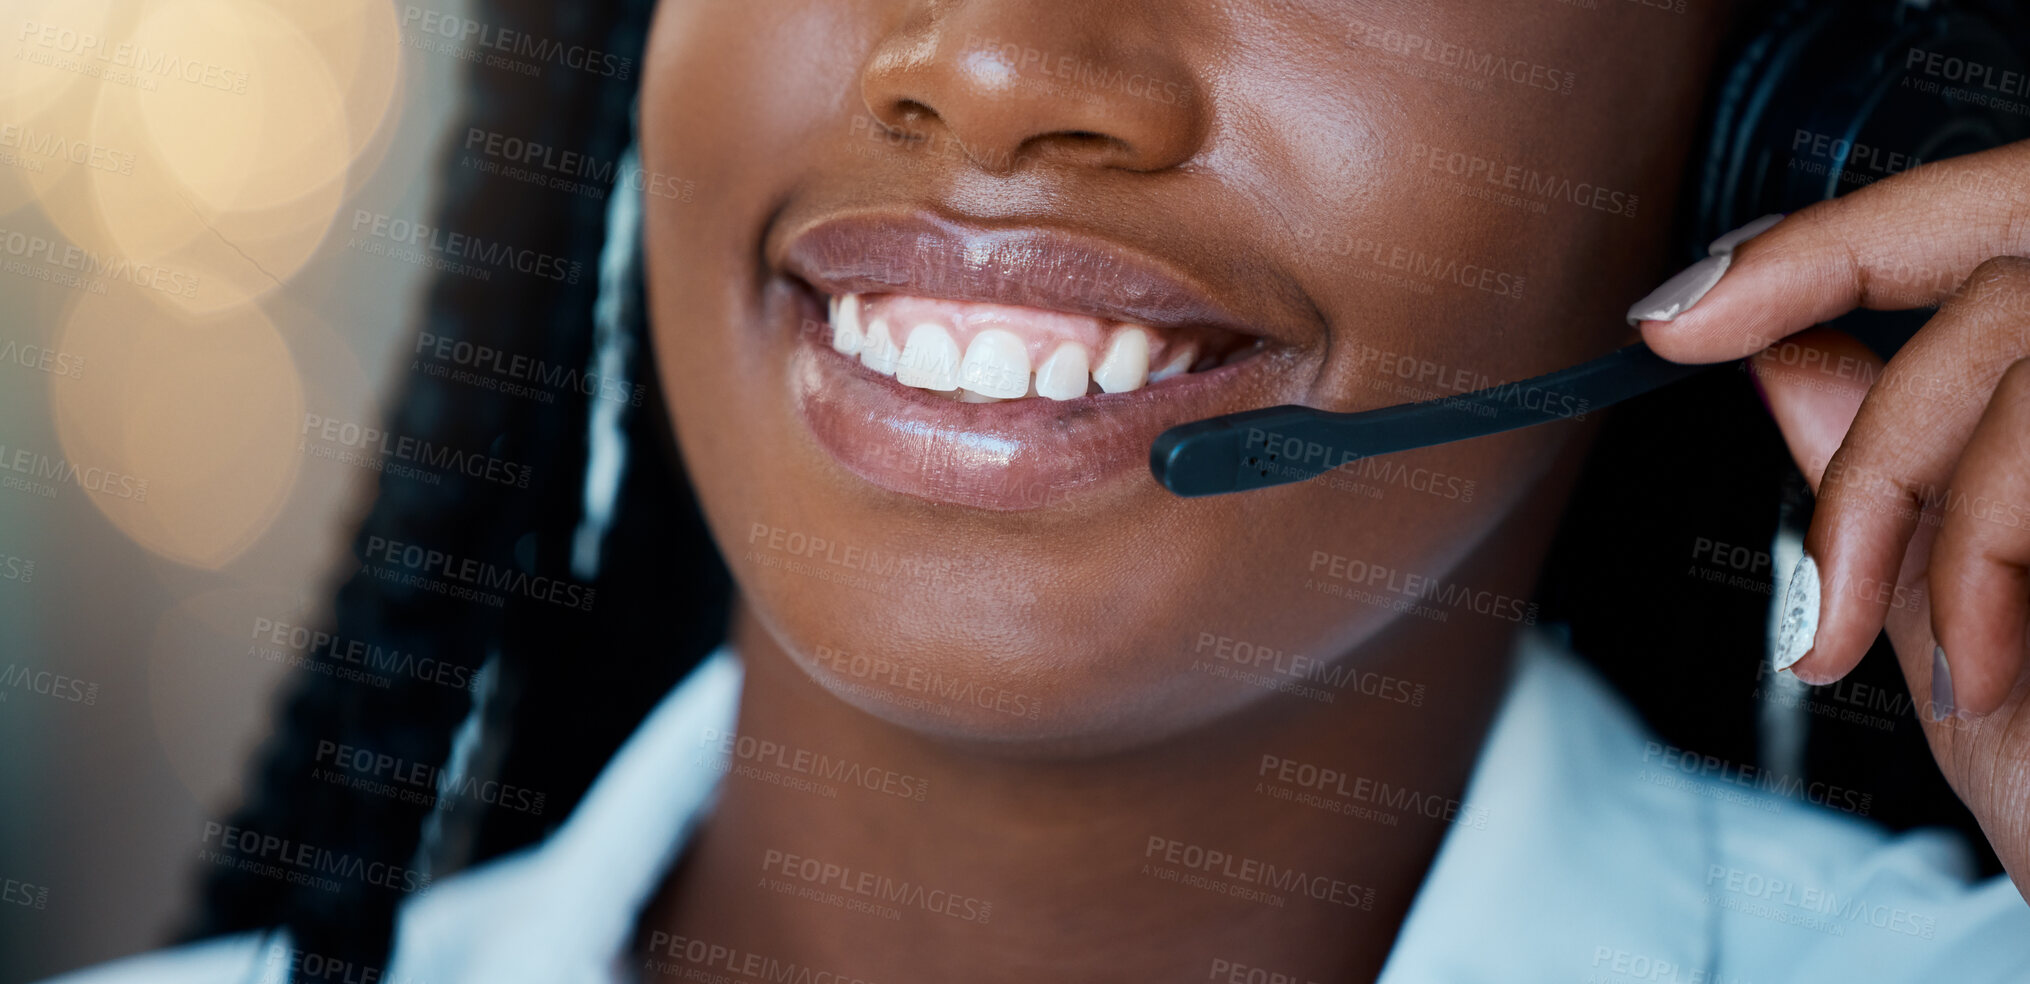 Buy stock photo Call center, phone call and mouth of black woman working in telemarketing, sales or a help desk. Contact us, crm and the smile of a woman consulting on customer service or customer support helpline.